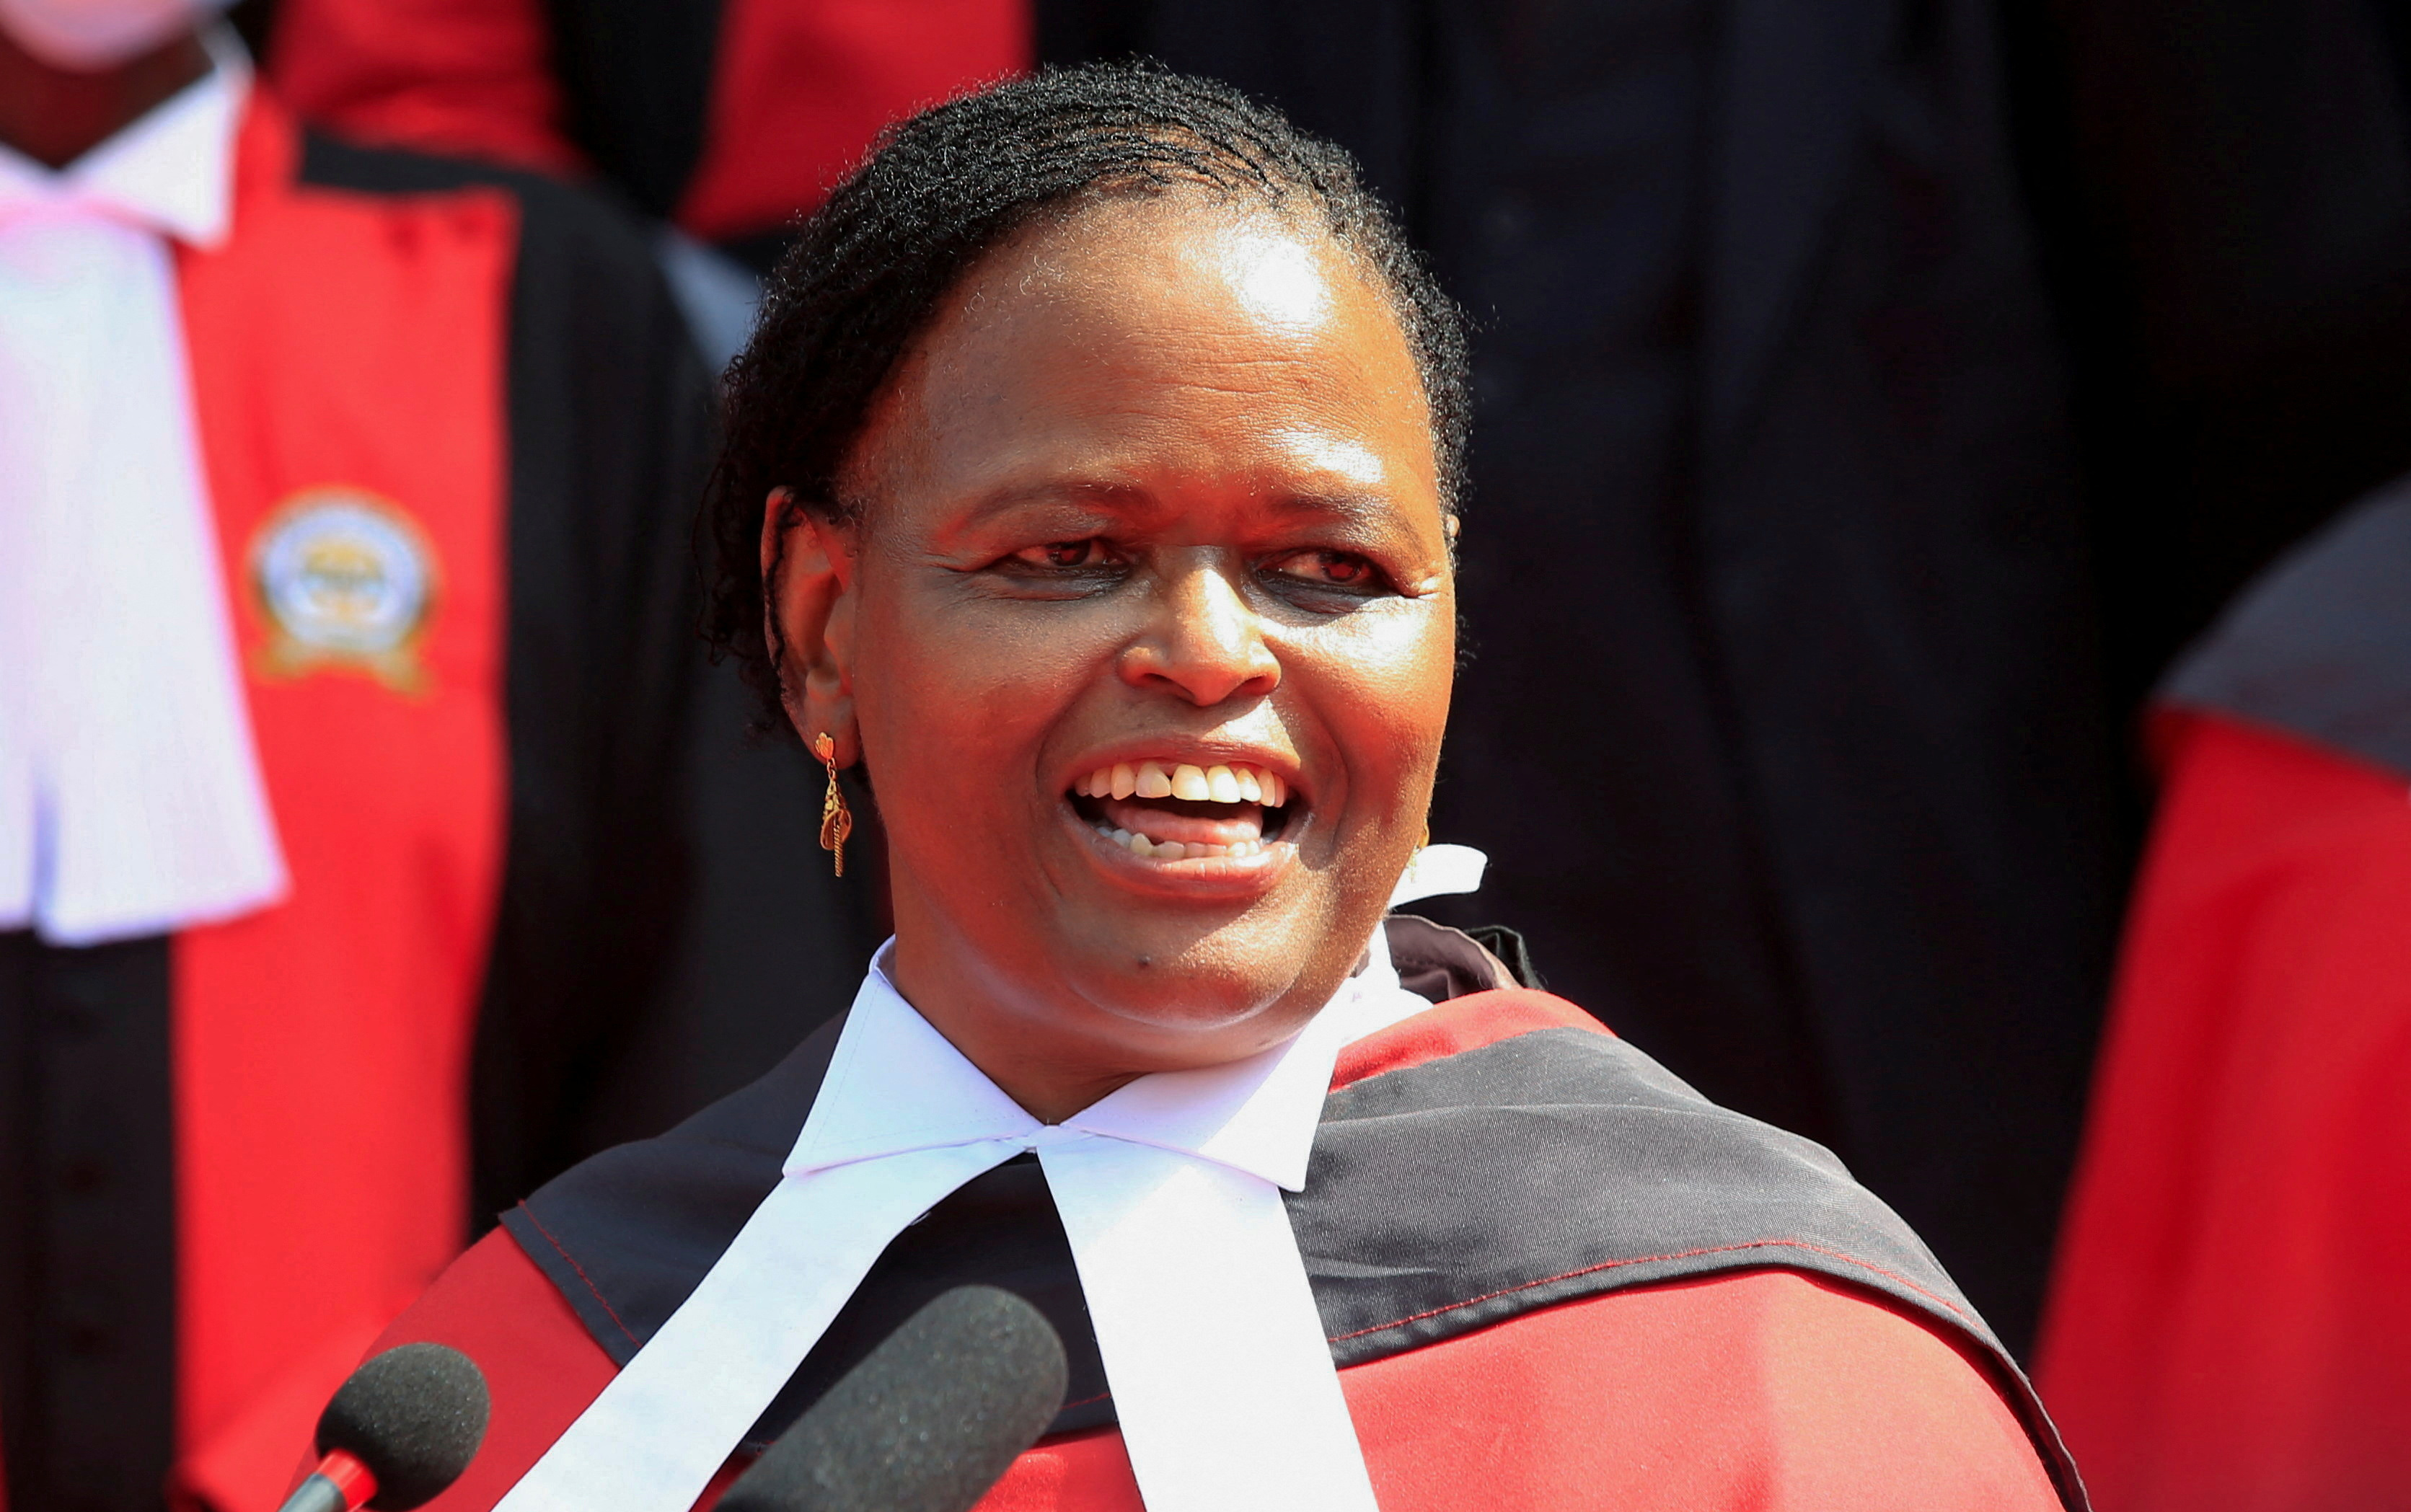 Kenya's Chief Justice Martha Koome addresses members of the Judiciary during a reception after her Swearing-in ceremony, outside the Supreme Court building in Nairobi